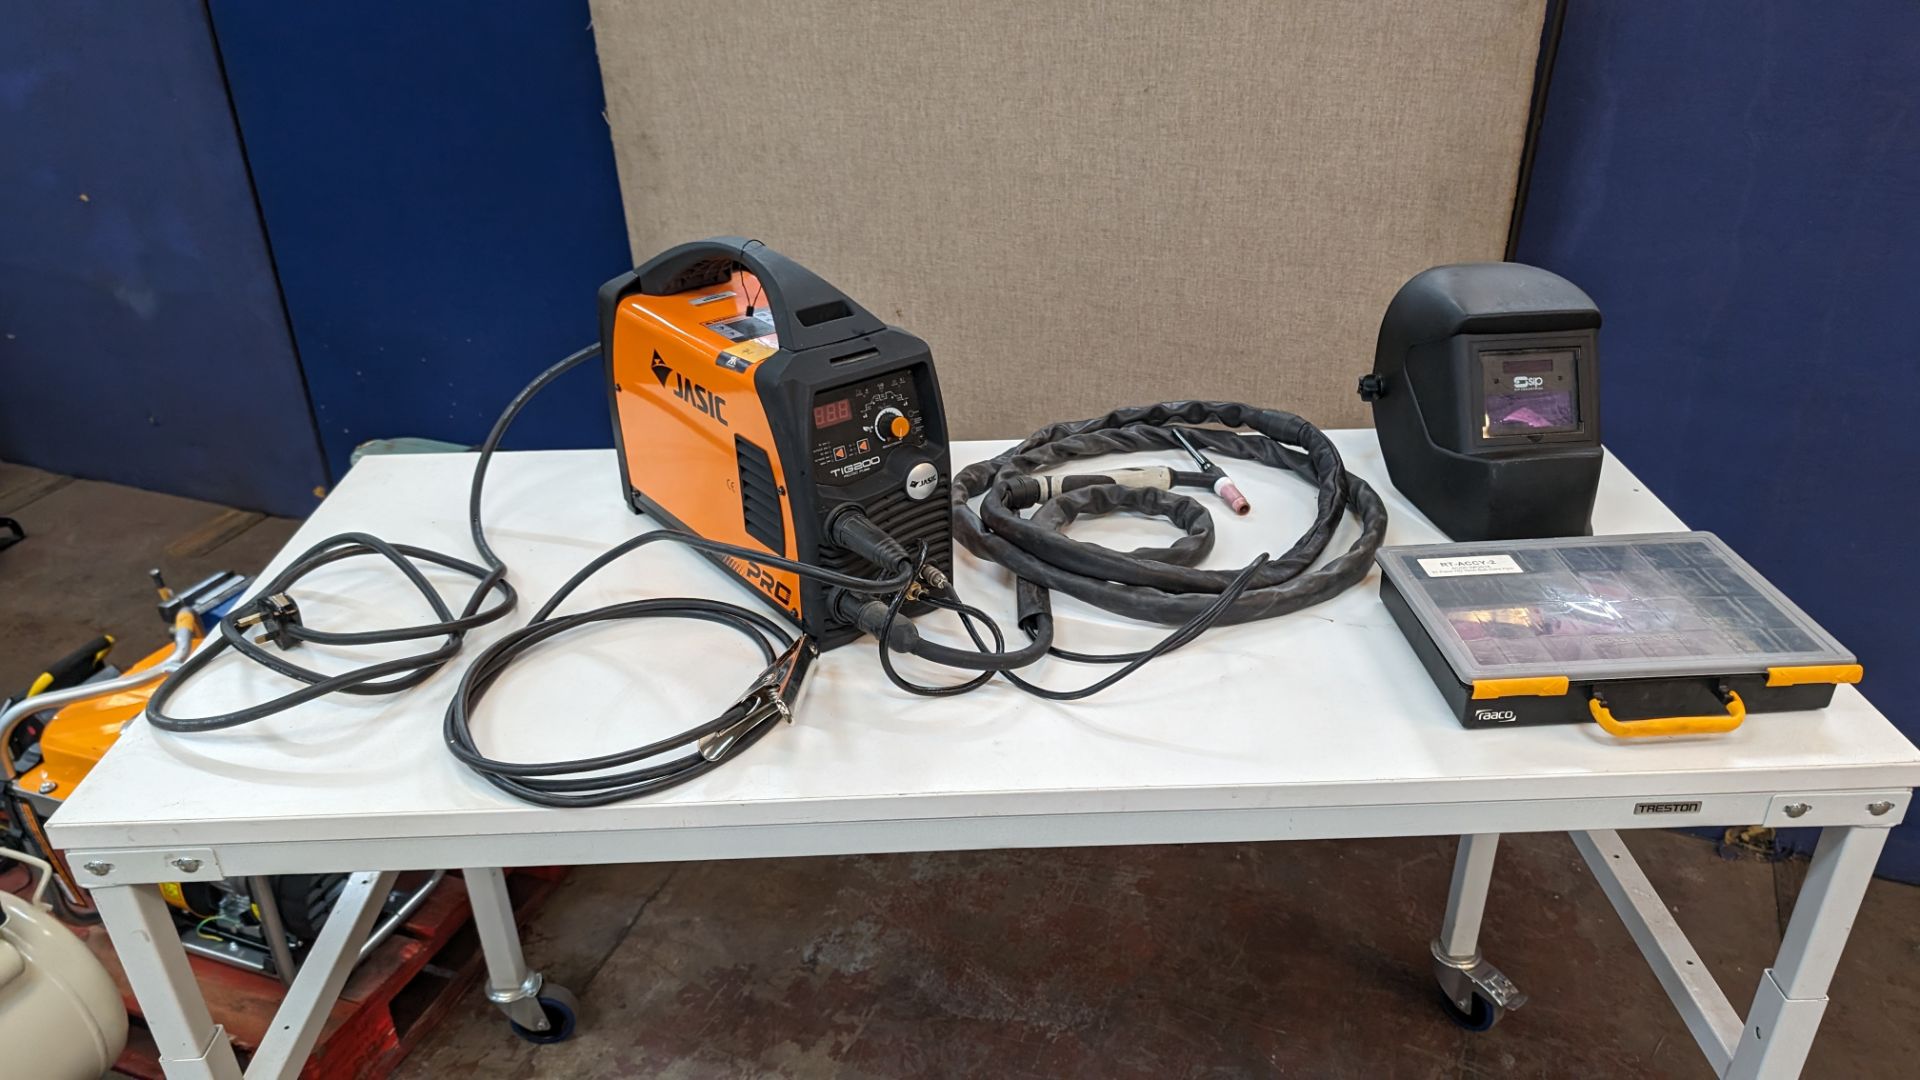 Jasic Pro tig 200 AC/DC pulse welder, including welding mask, box of consumables & other items as pi - Image 2 of 23